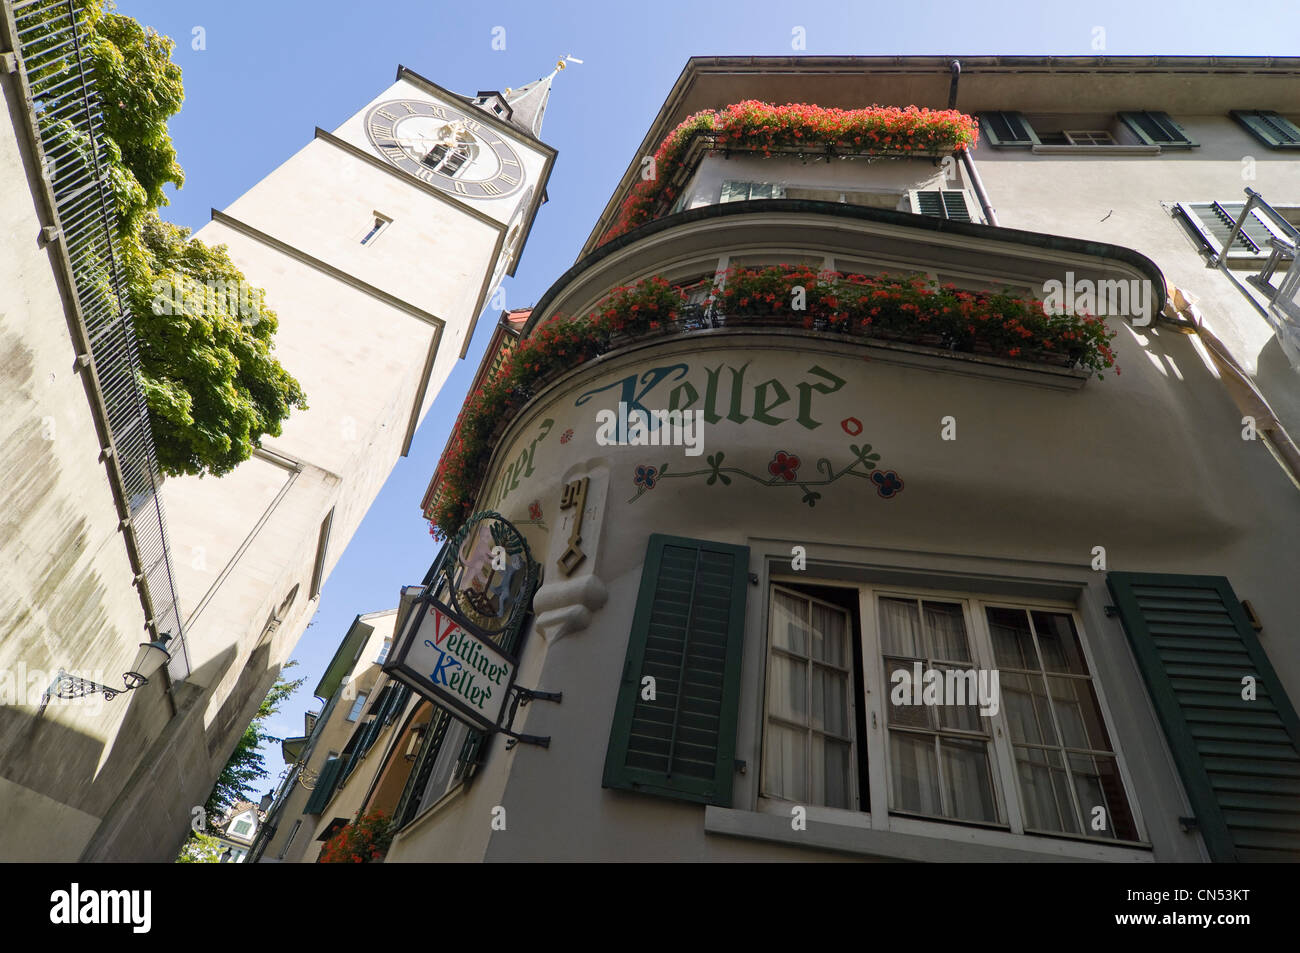 Horizontal wide angle of St Peter kirche, St Peter's church on Lindenhof hill in Zurich on a sunny day. Stock Photo